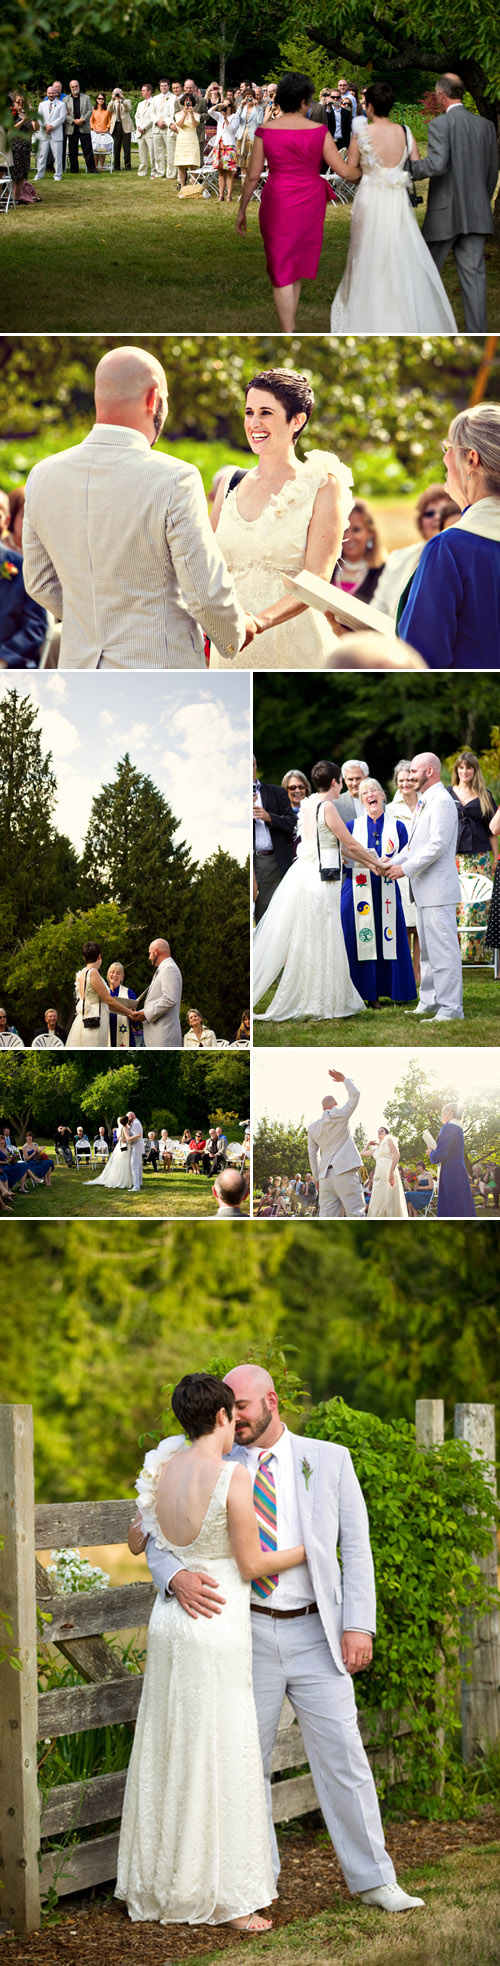 colorful outdoor indian-inspired farm wedding ceremony photographed by Gabriel Boone